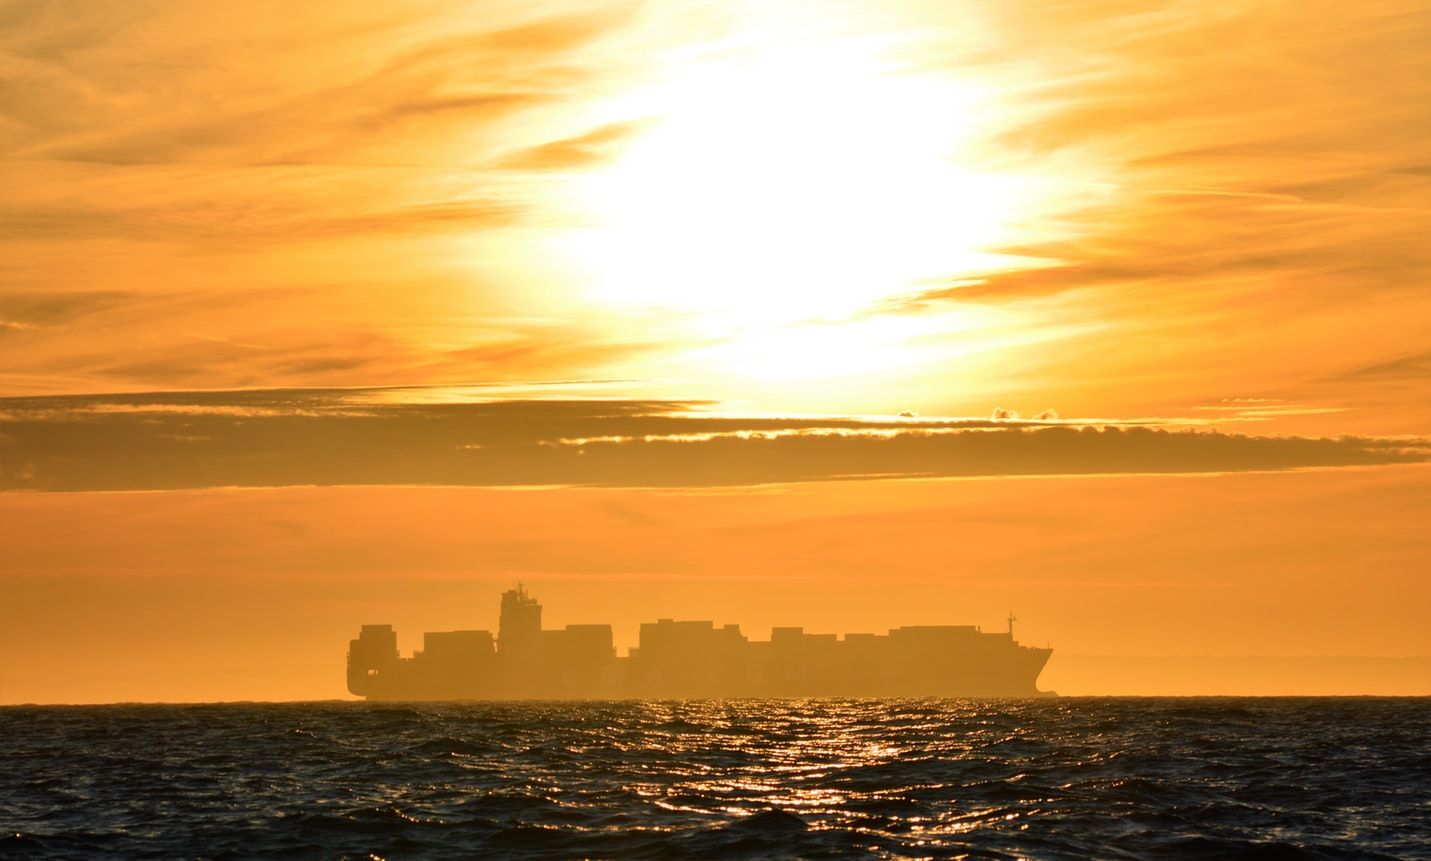 Silhouette of a container ship at sunset